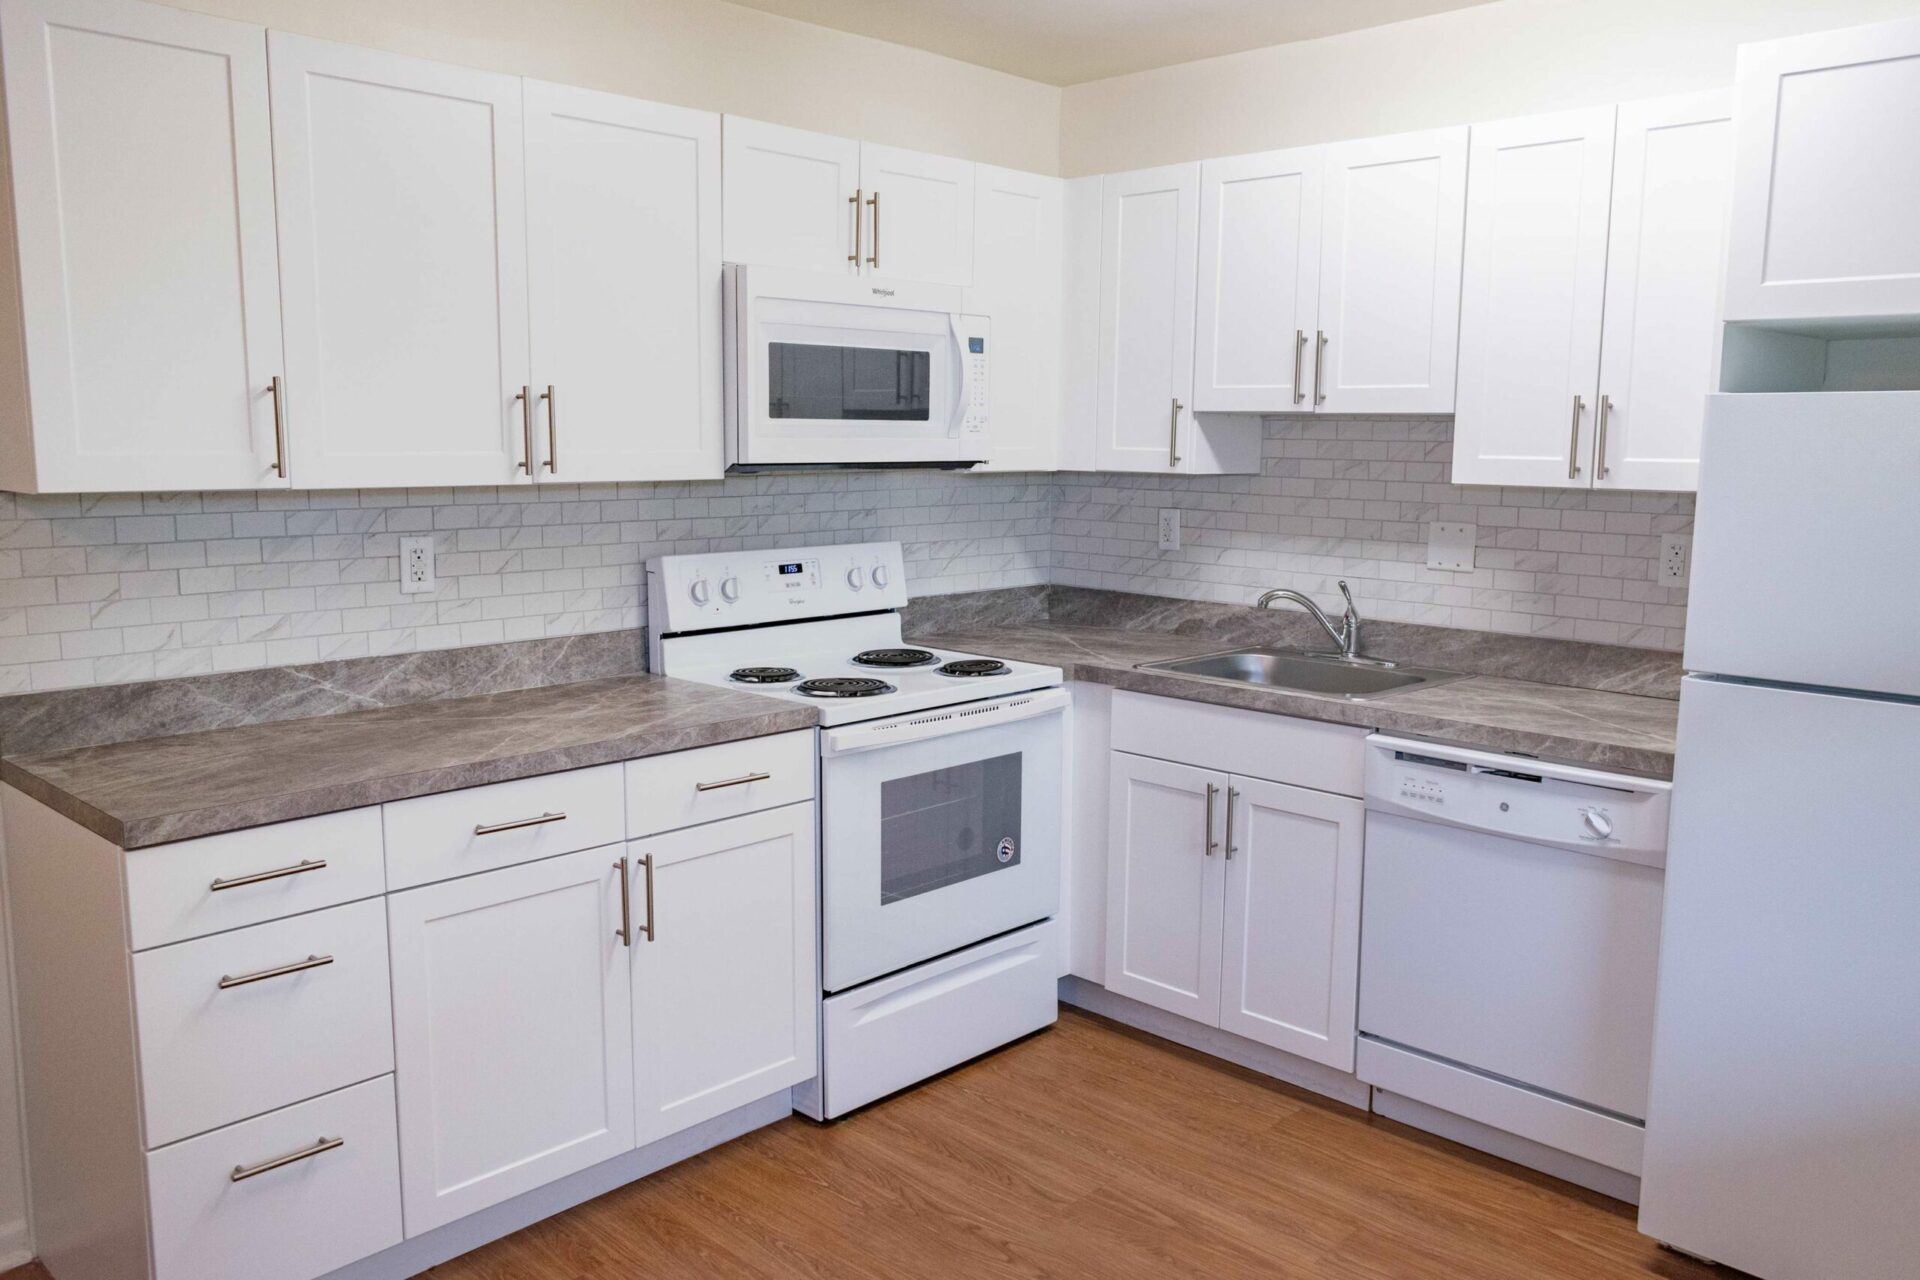 Westover Village kitchen with white cabinets and appliances